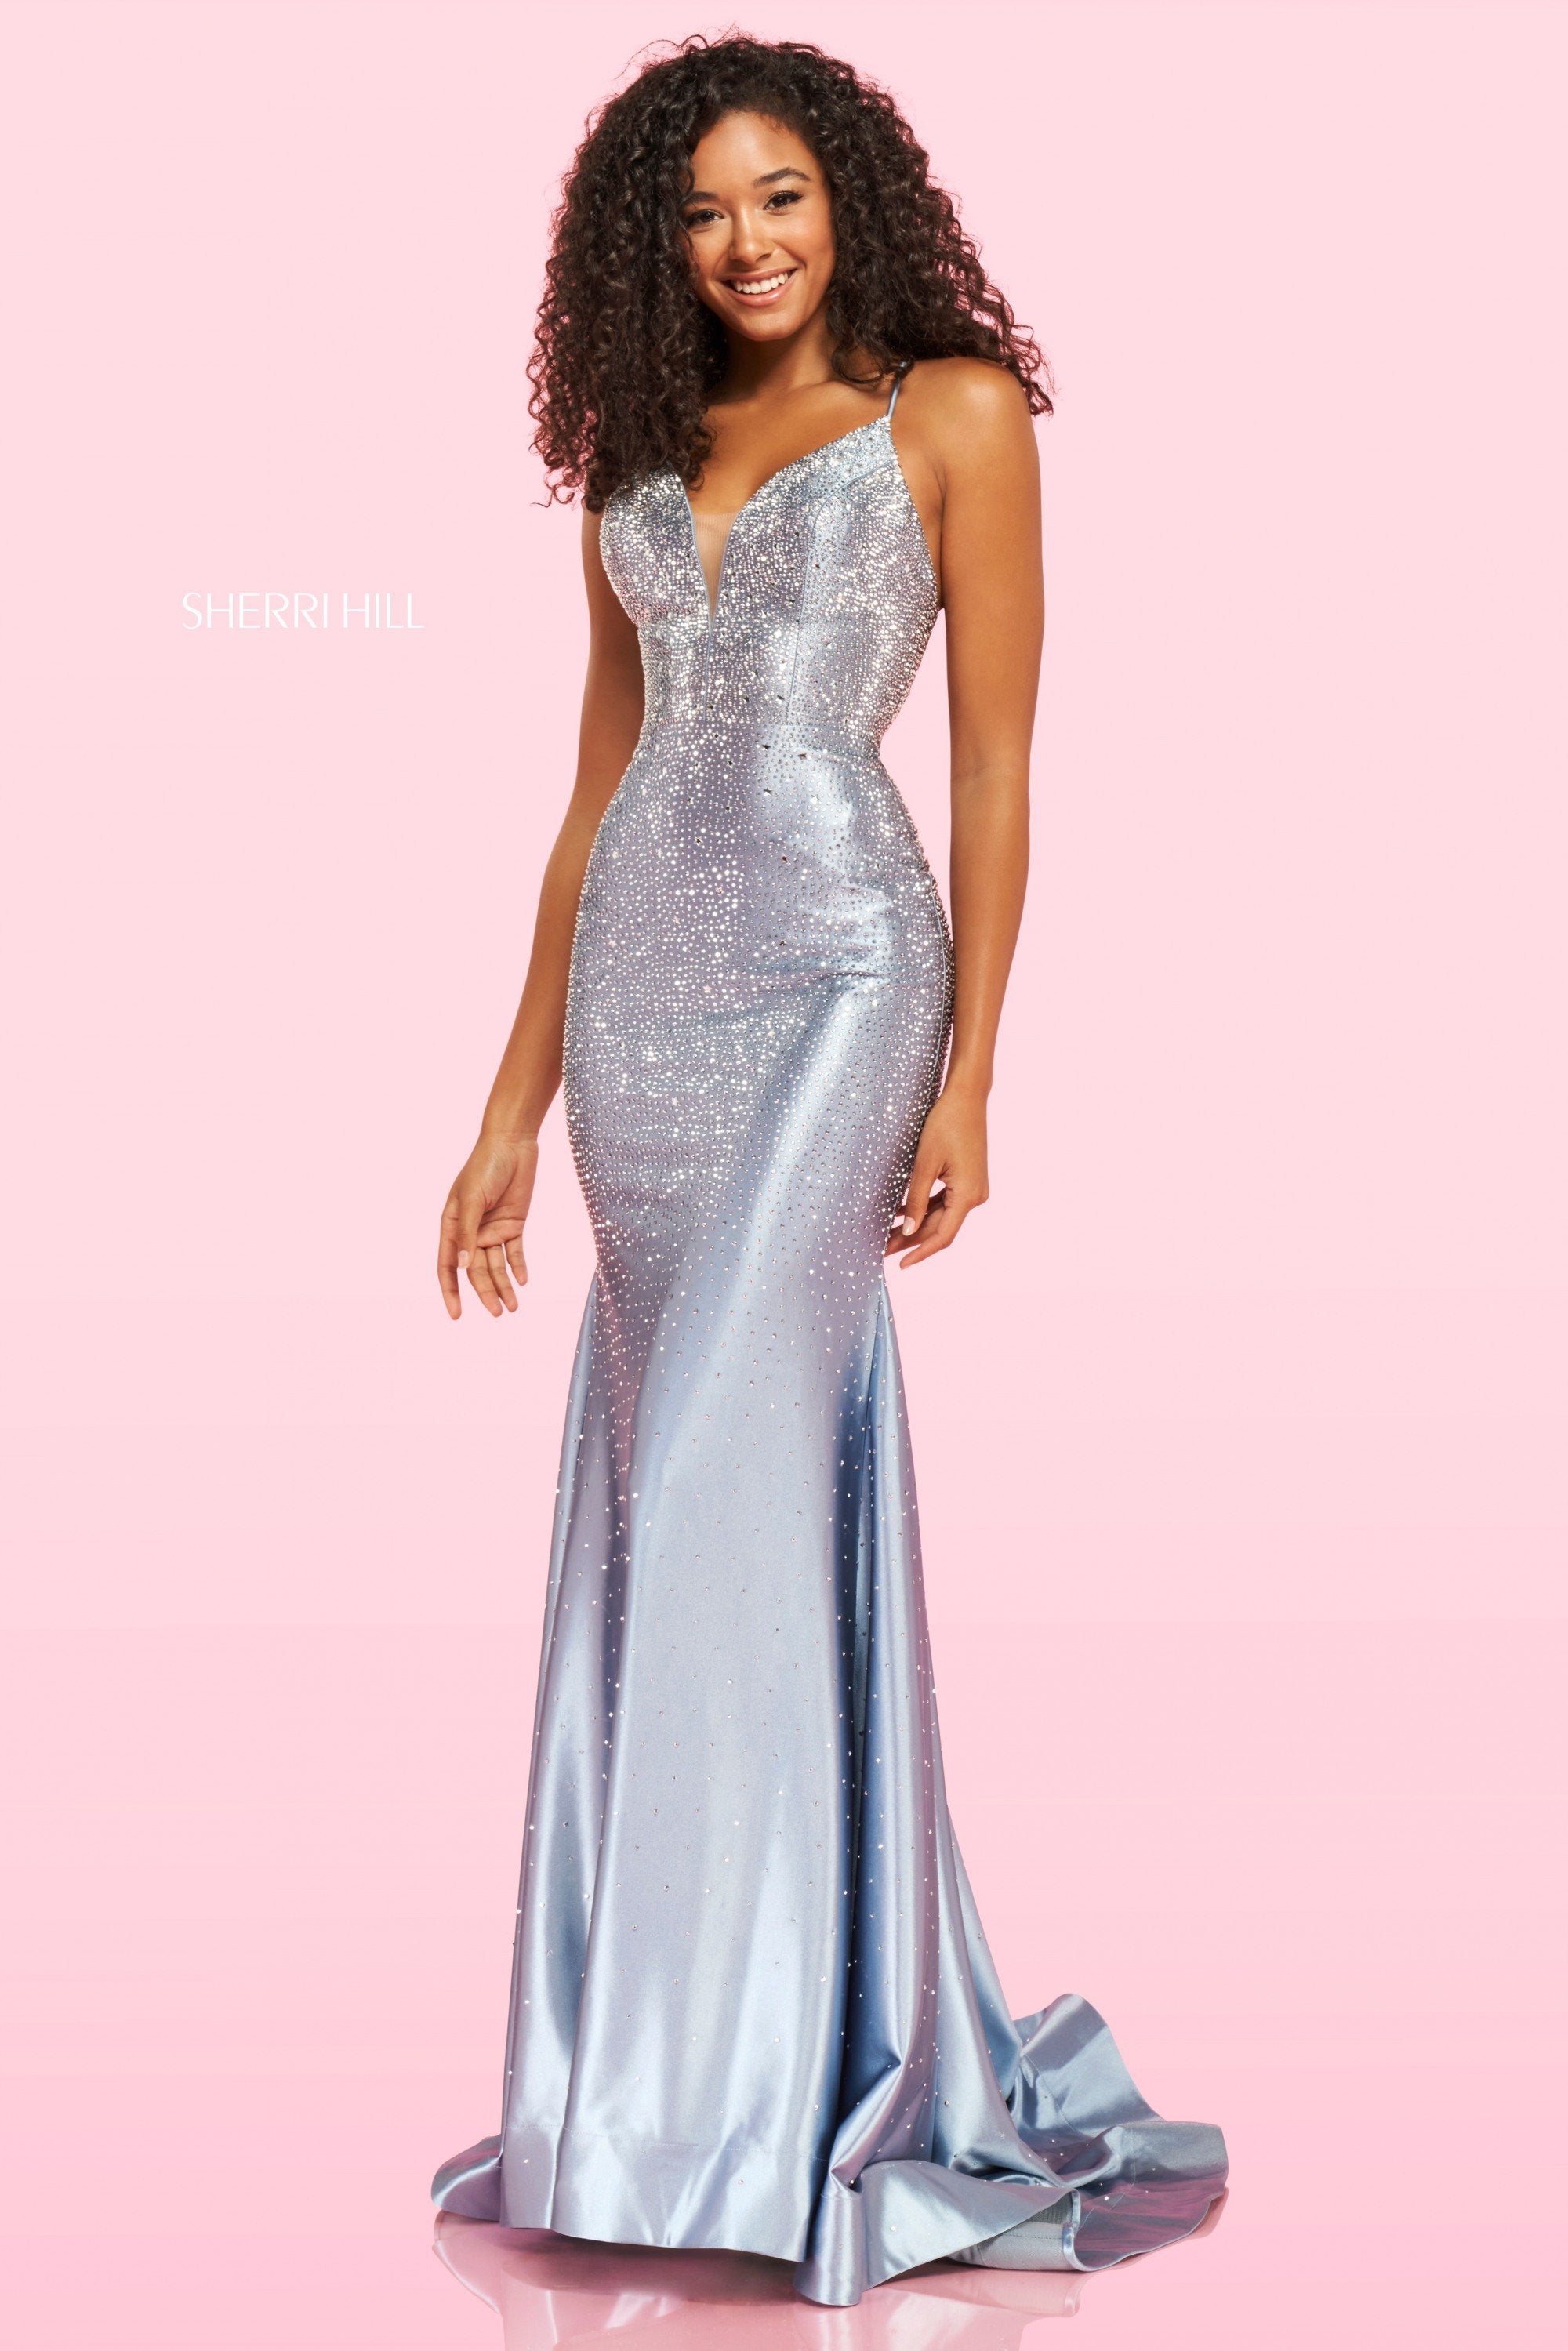 Sherri Hill 54273 dress images in these colors: Grey.